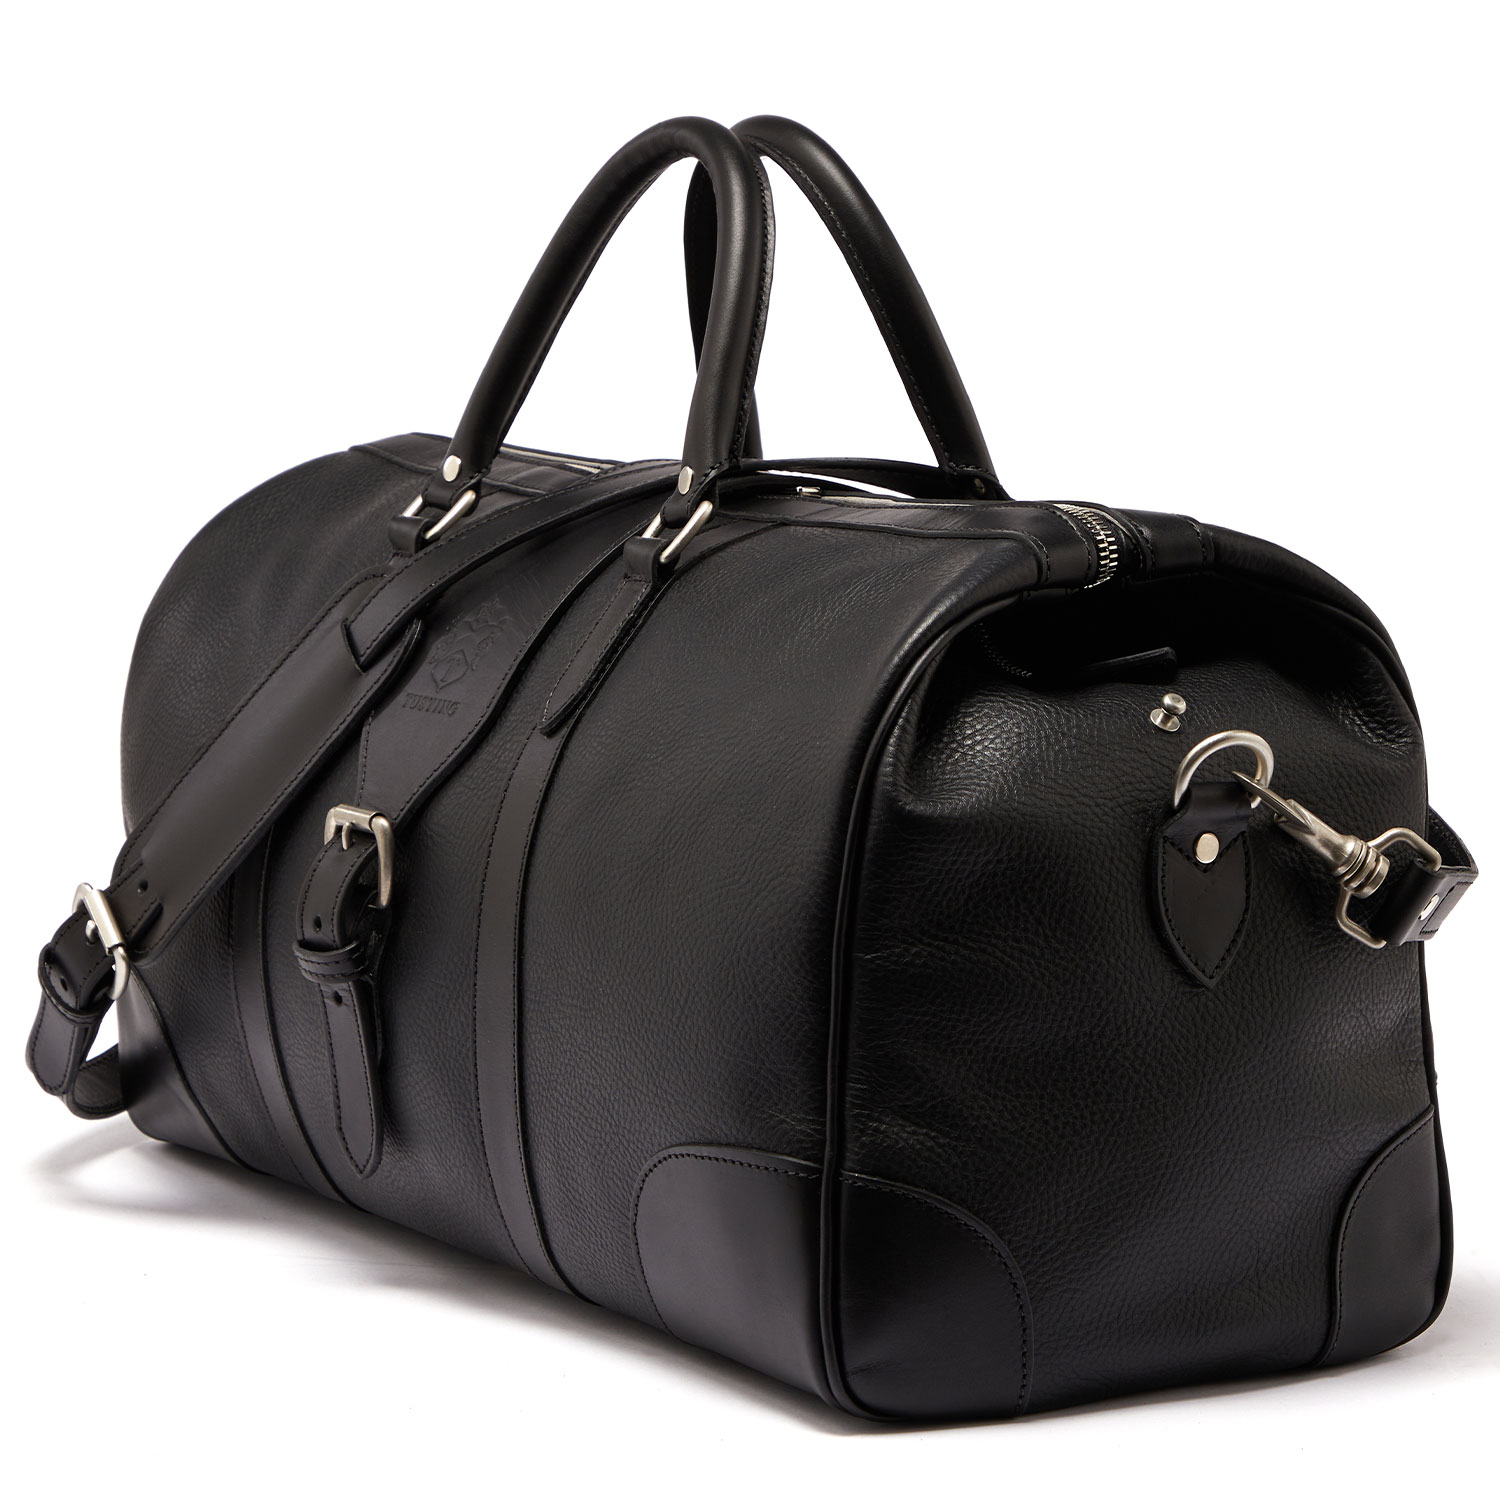 Chellington Leather Heritage Holdall | Made in England by Tusting